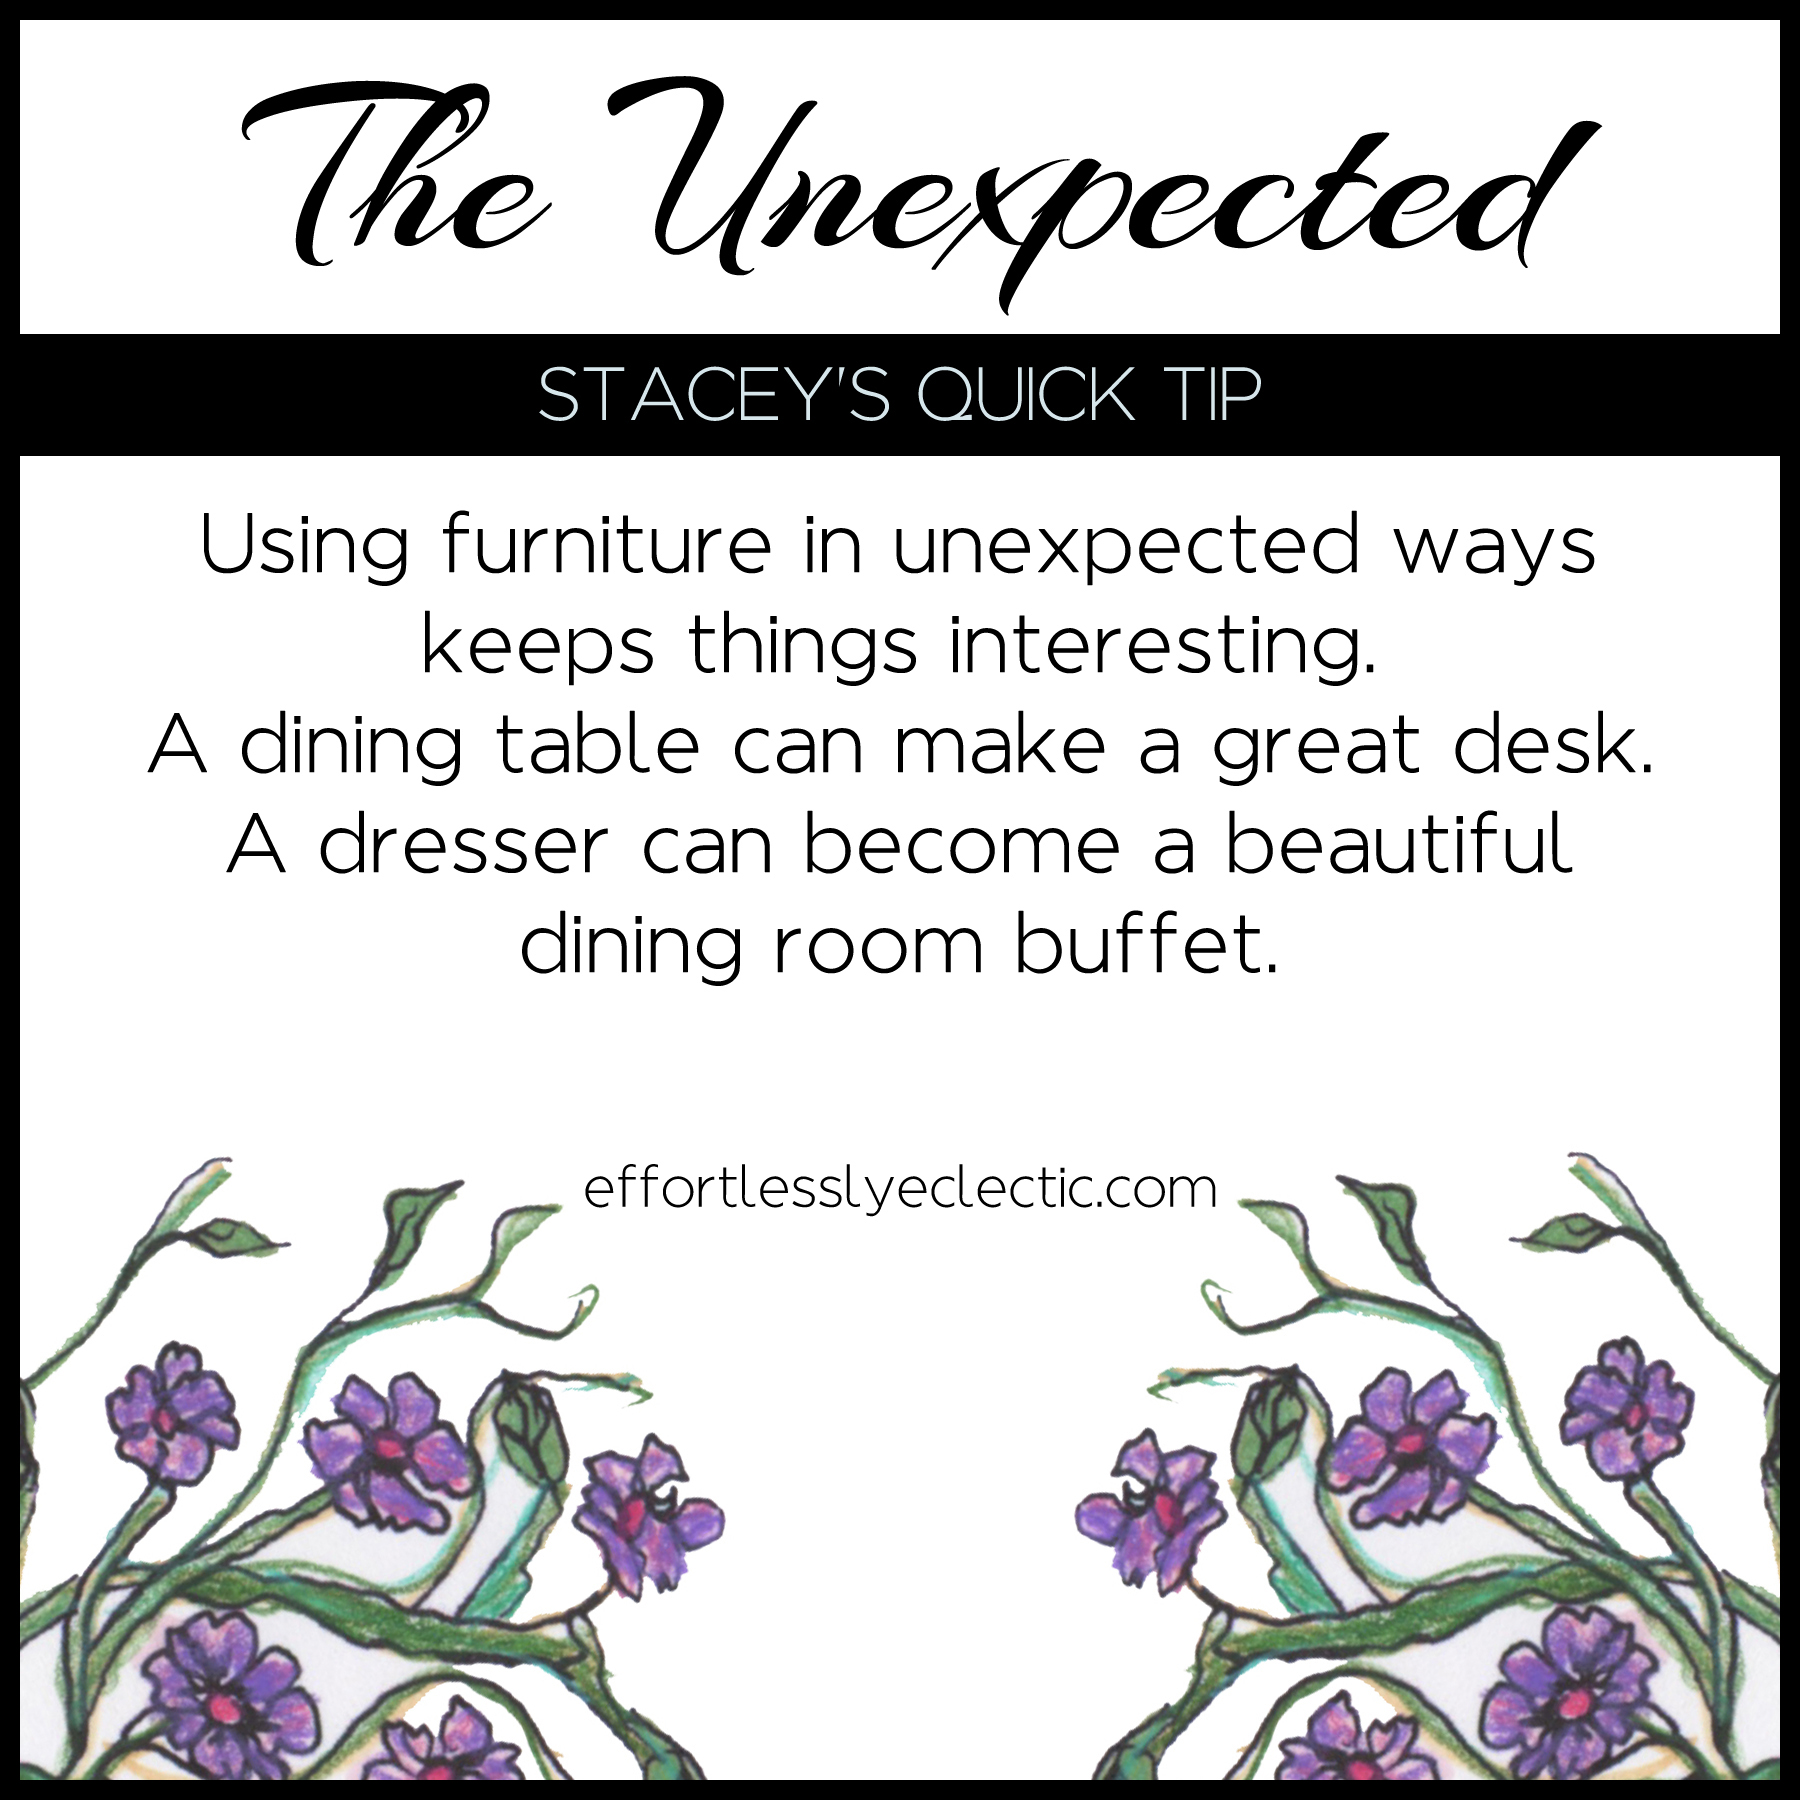 The Unexpected - A creative home decor ideas tip about how to make your home interesting 